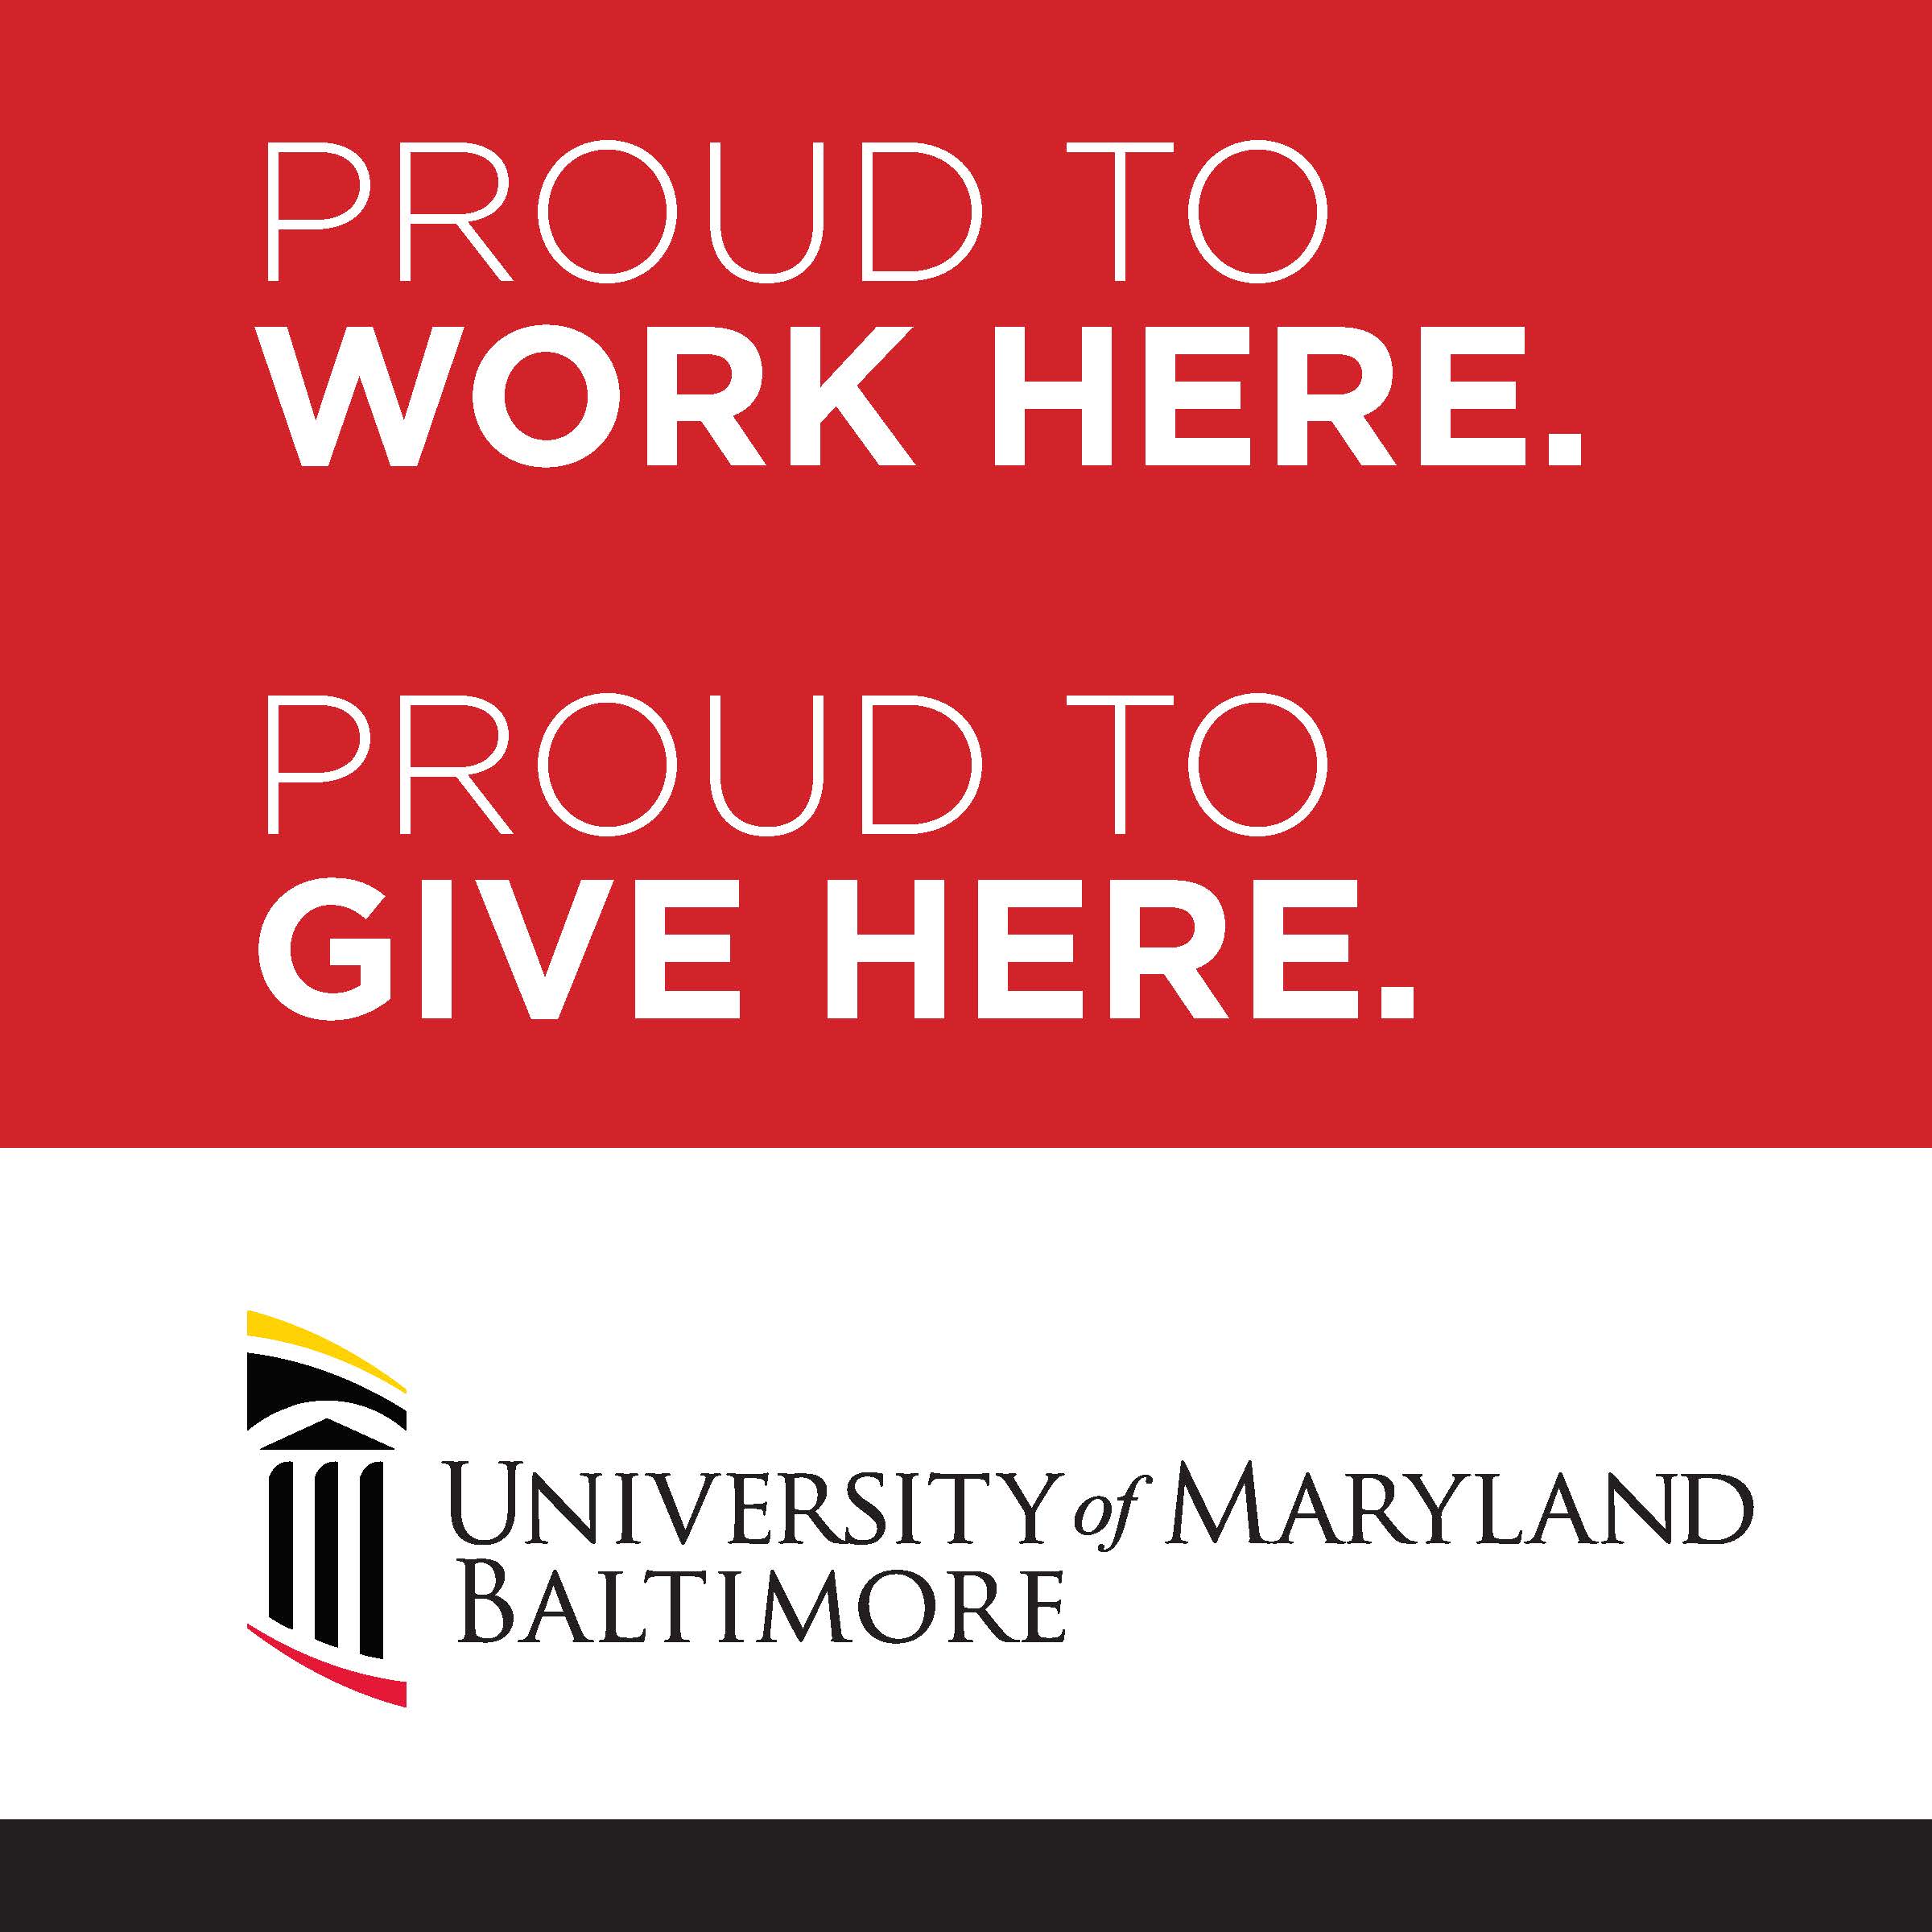 Proud to Work Here employee campaign graphic